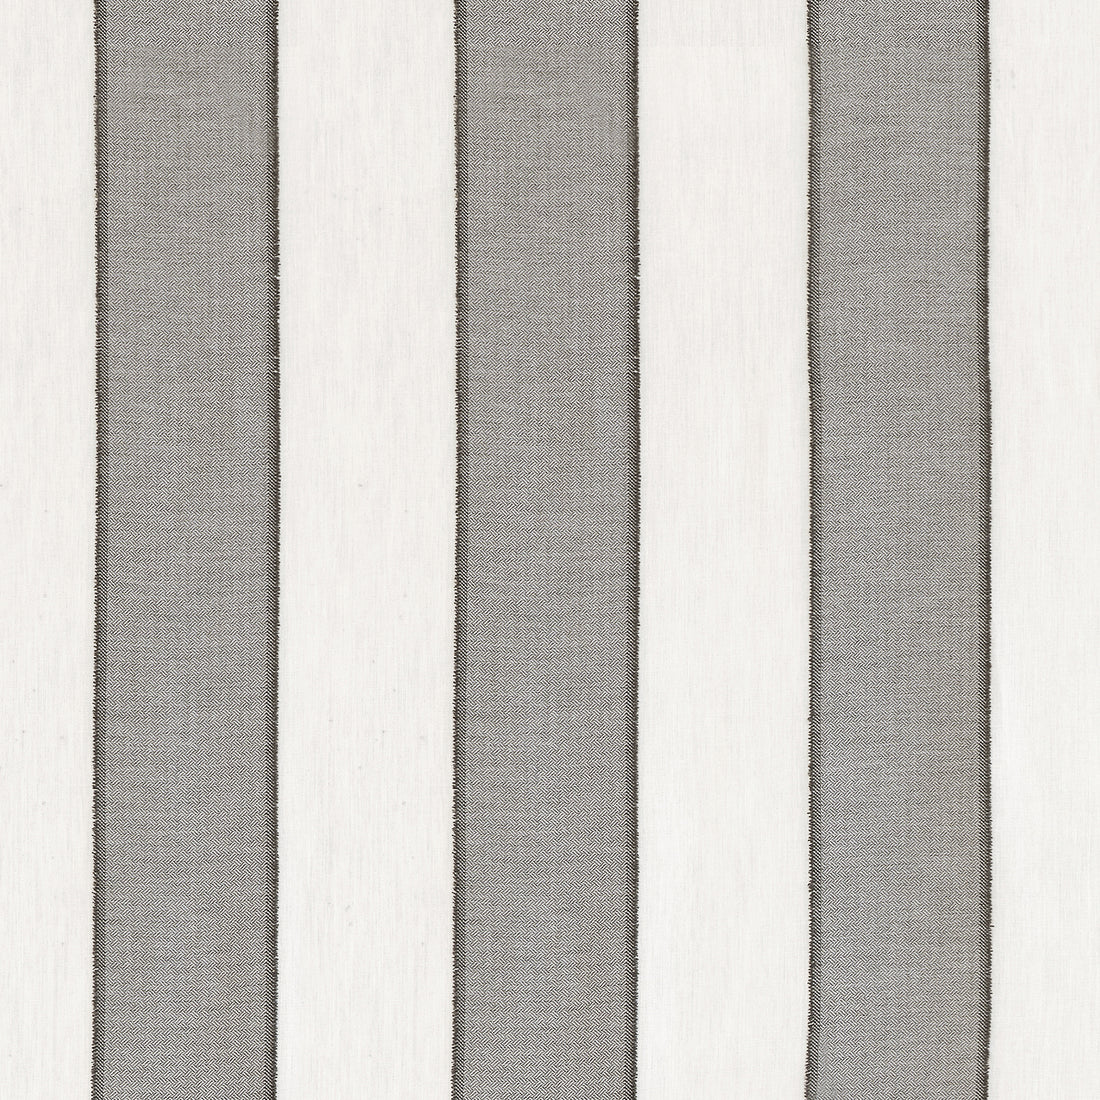 Intaglio Stripe fabric in charcoal color - pattern number FWW81746 - by Thibaut in the Locale Wide Width collection